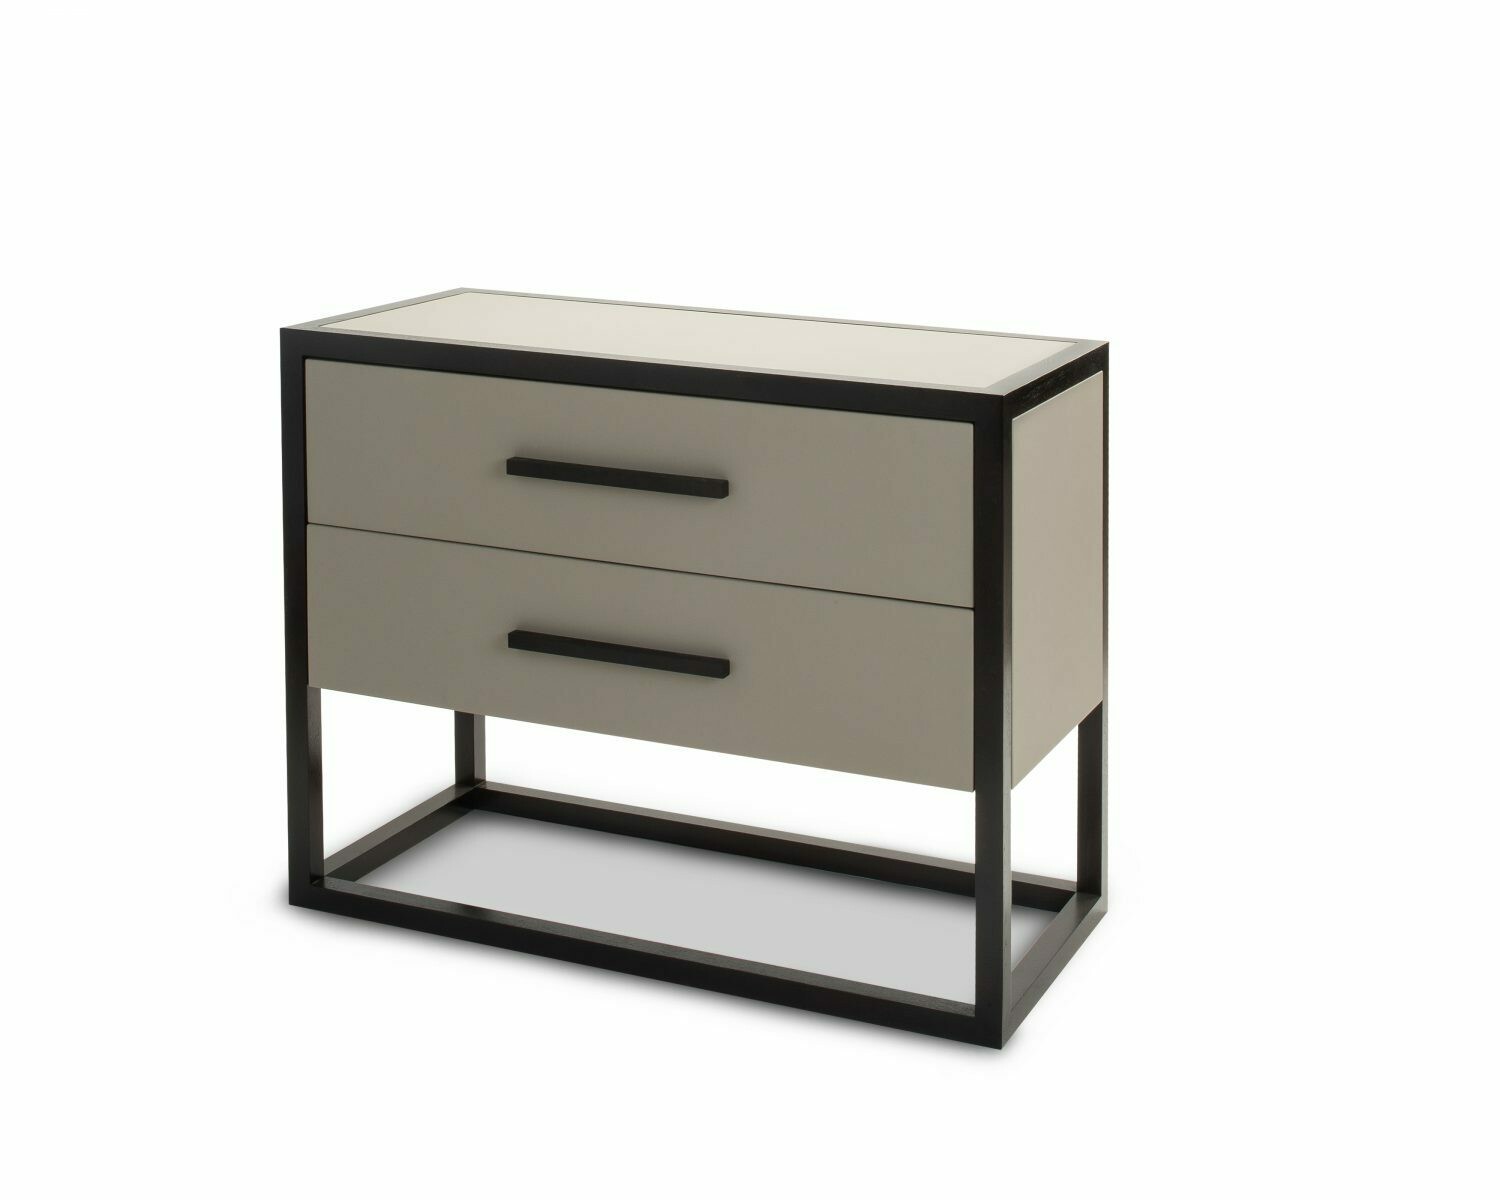 ROUX CHEST OF DRAWERS